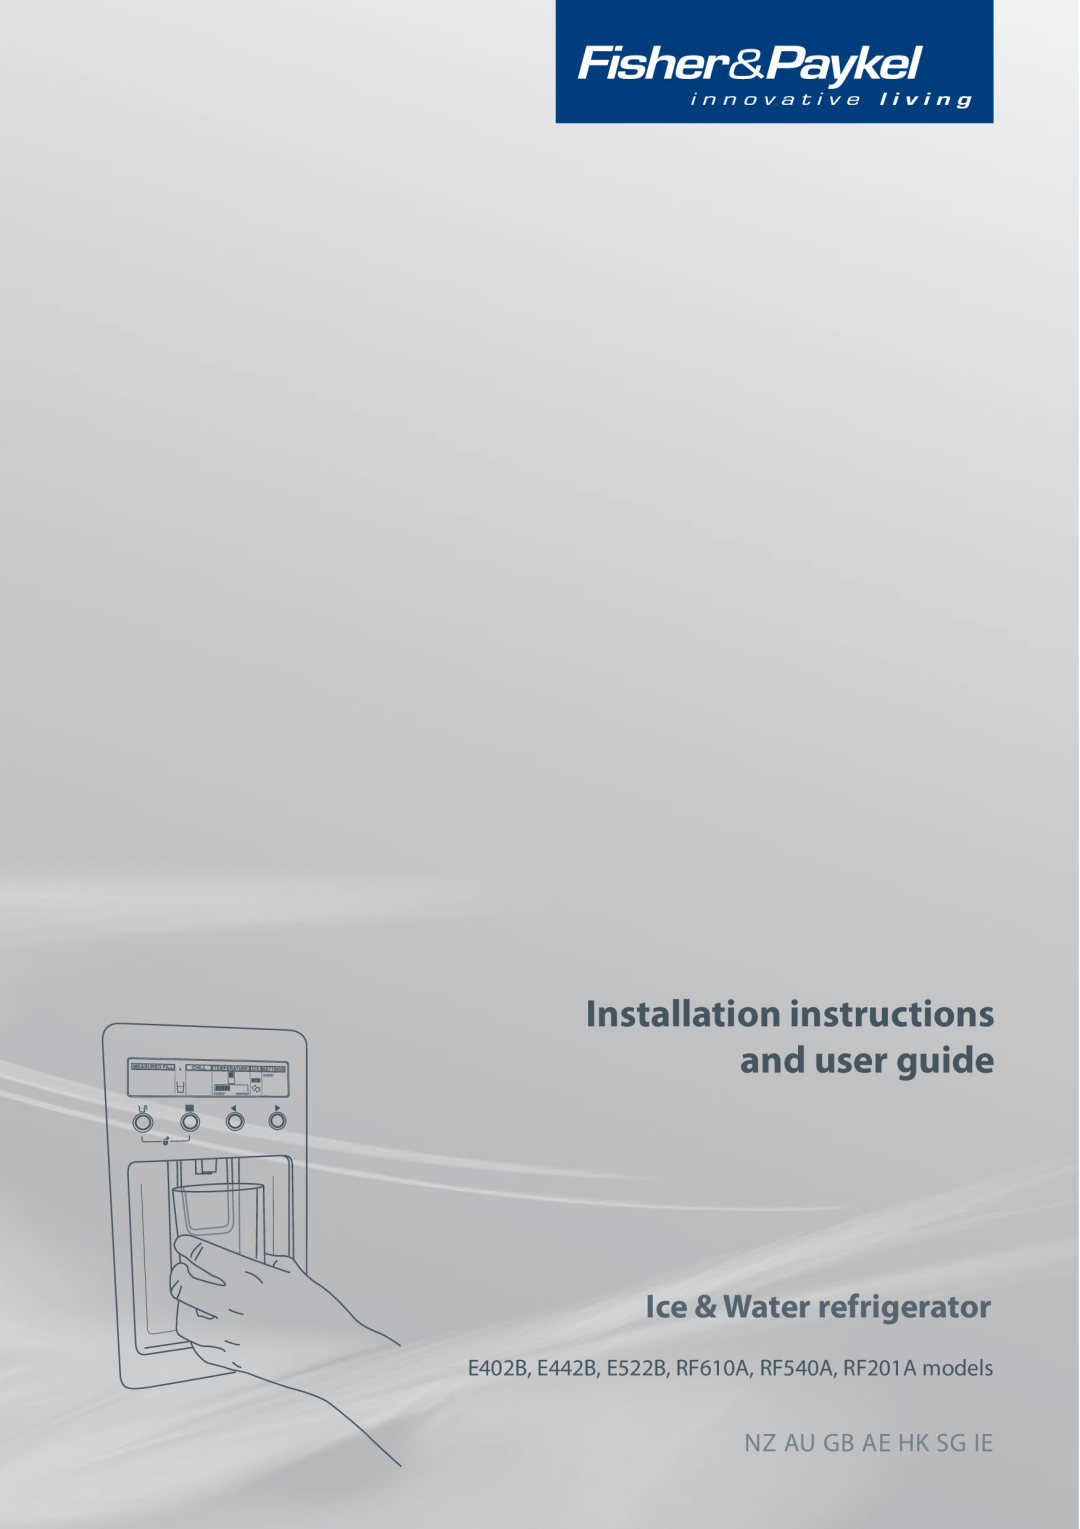 Fisher & Paykel RF201A installation instructions Installation instructions and user guide, Ice & Water refrigerator 